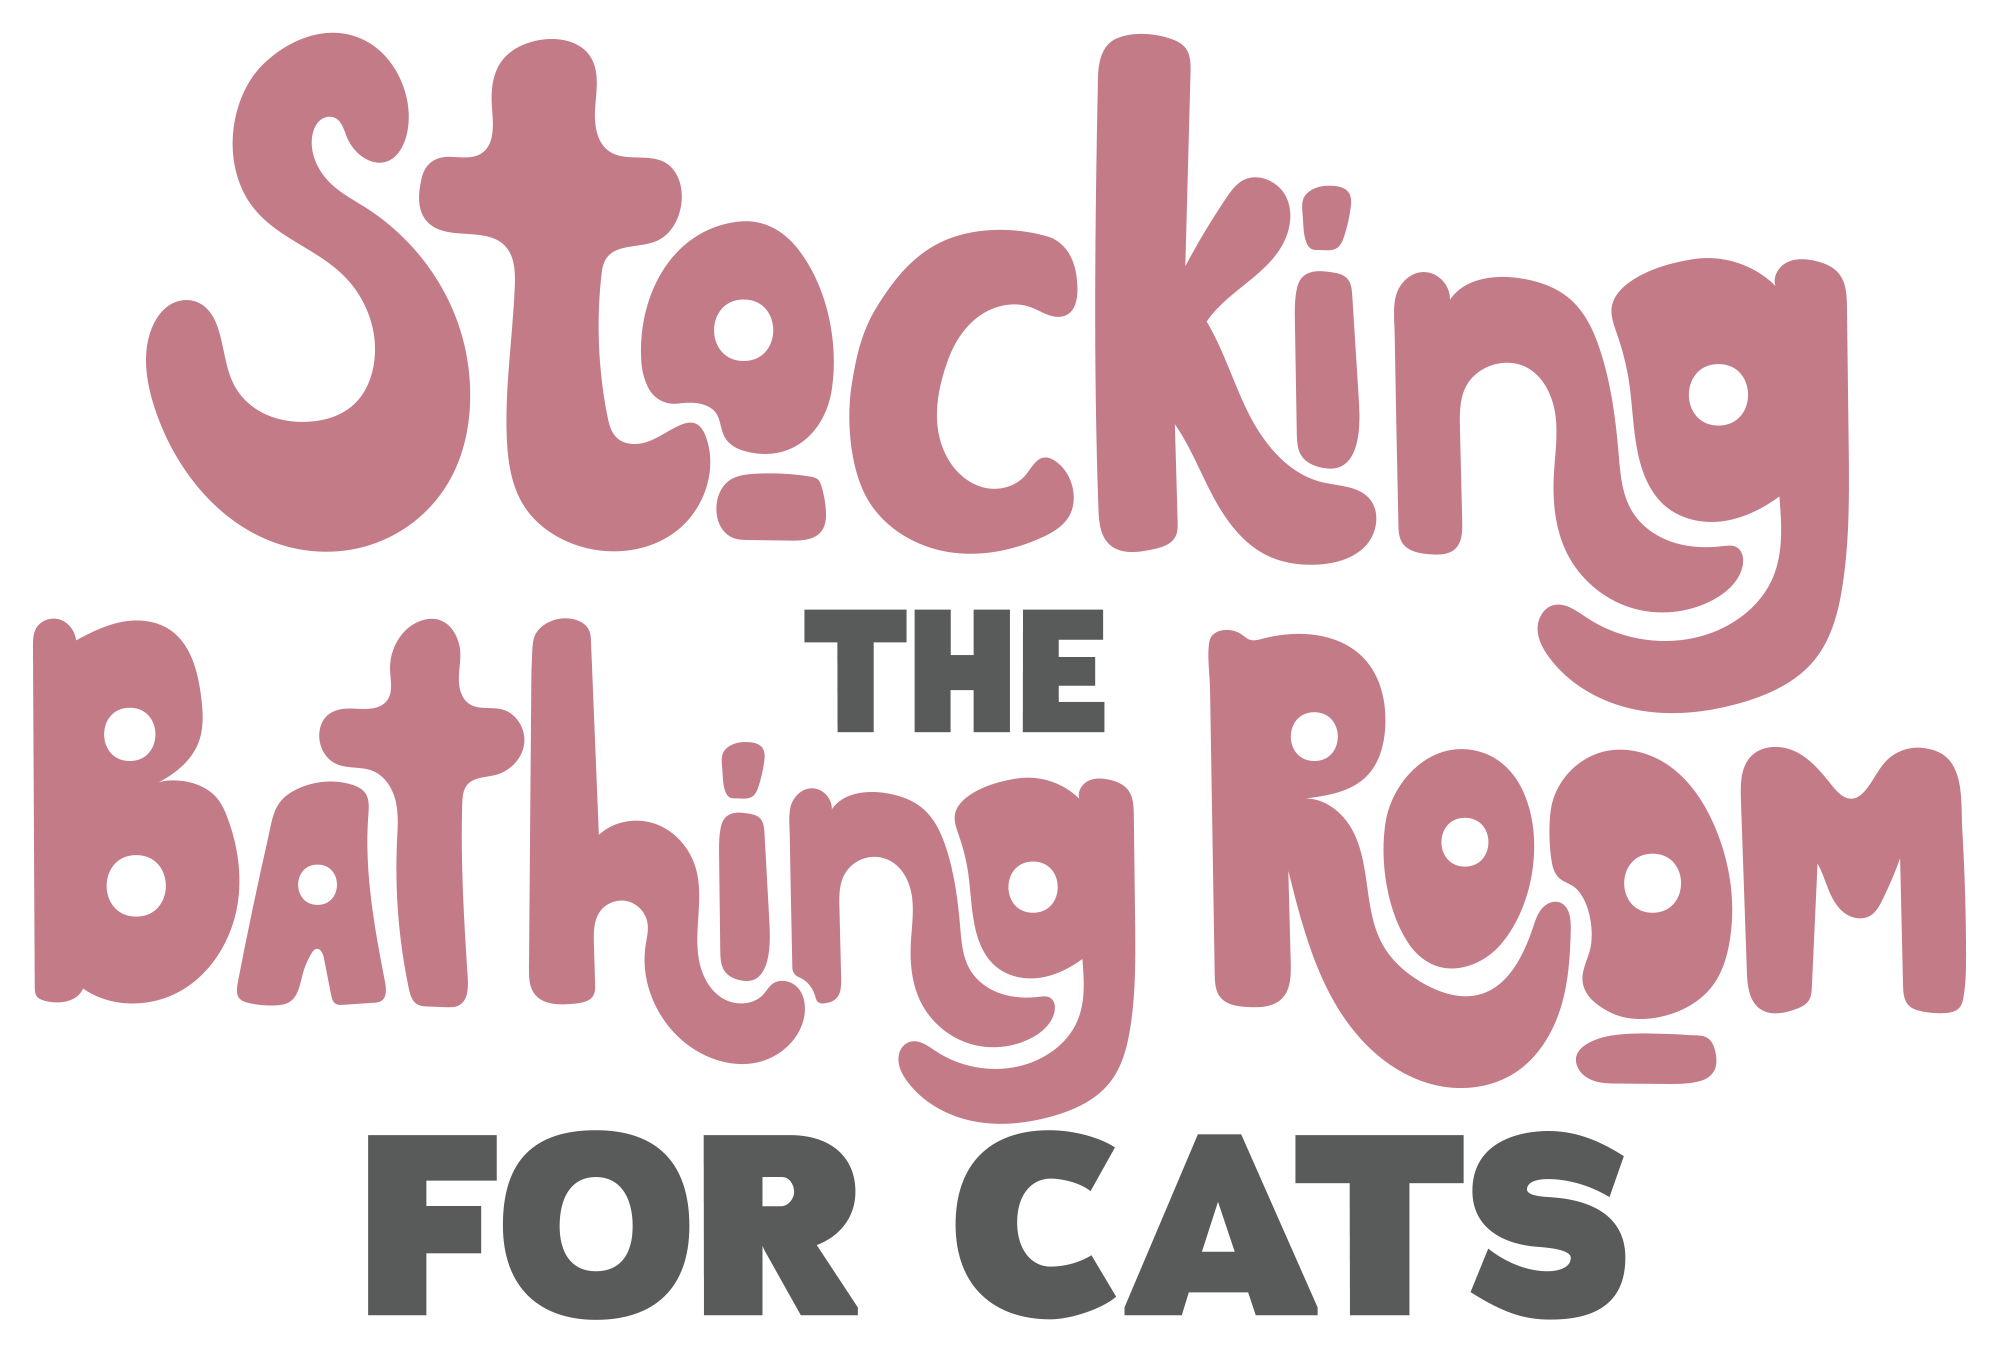 Stocking the Bathing Room for Cats